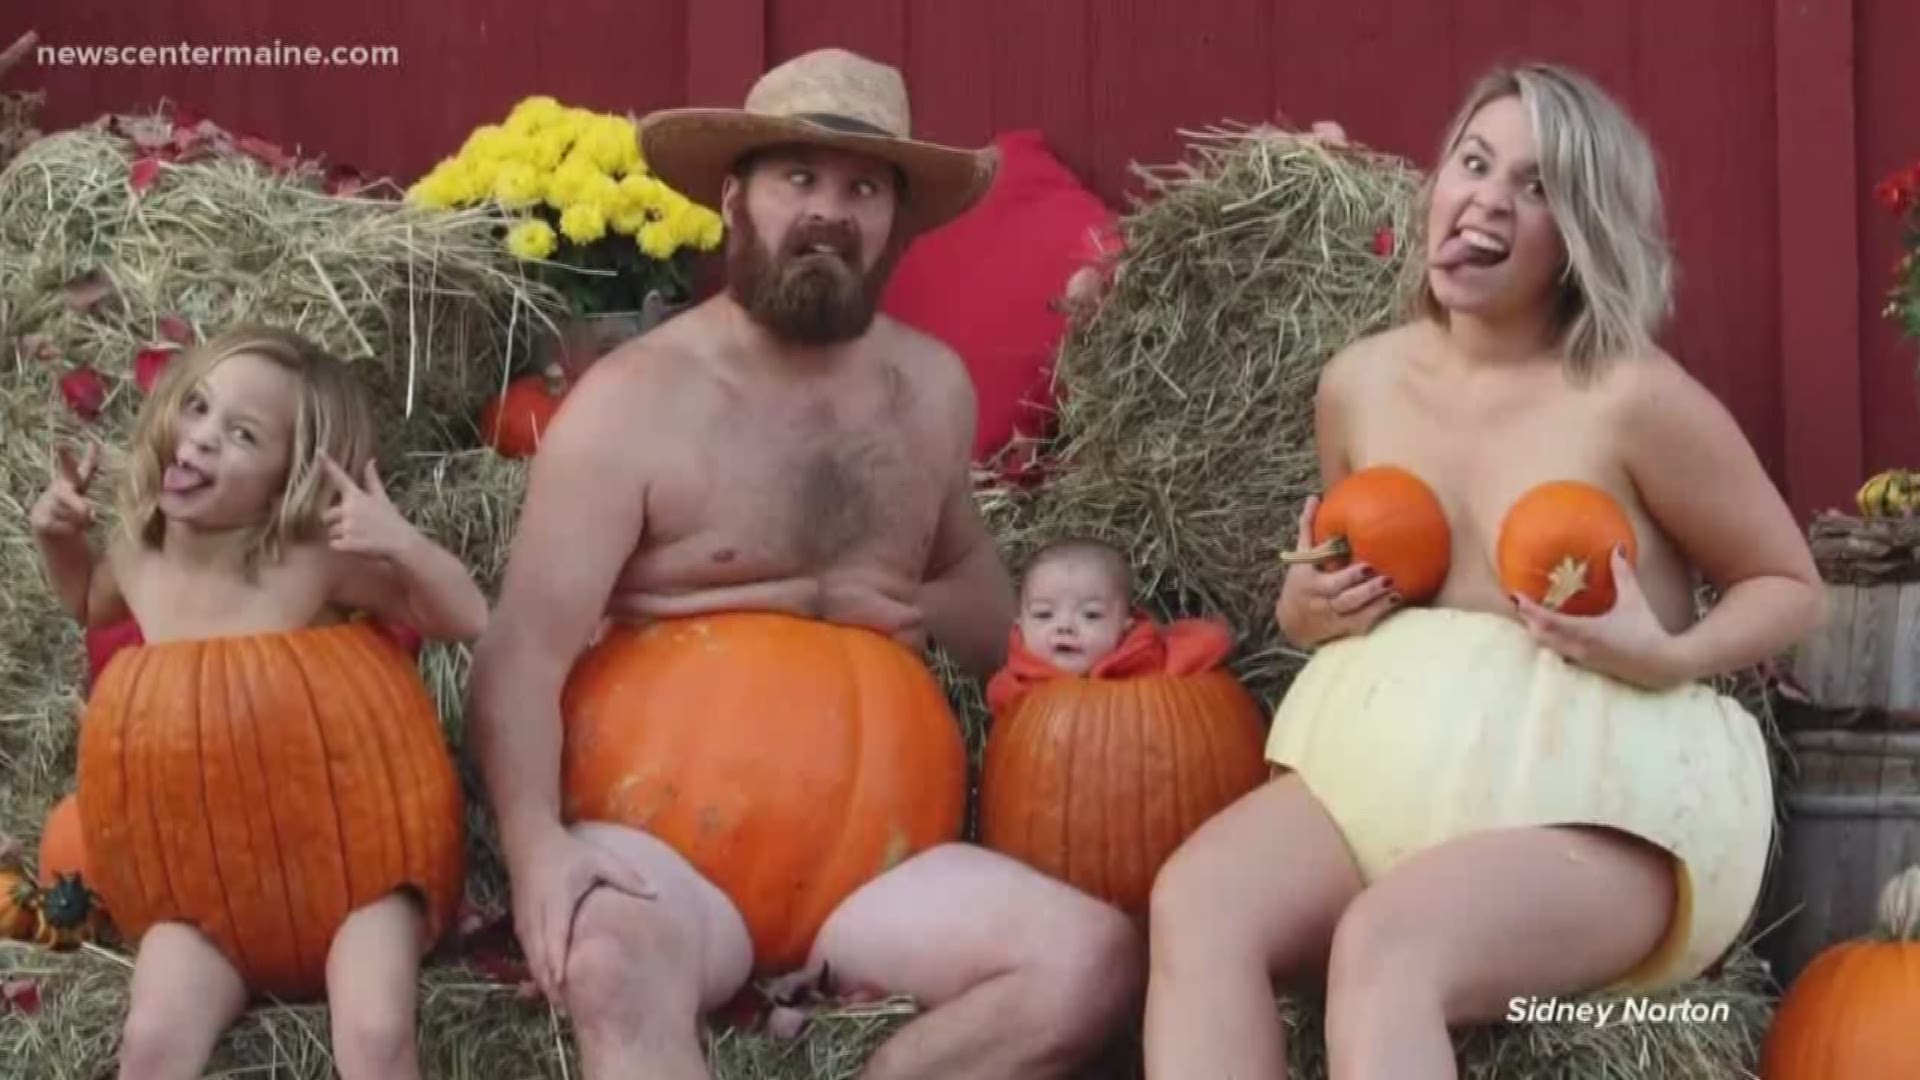 Mike and Sidney Norton get silly and make people laugh with their family's holiday card.